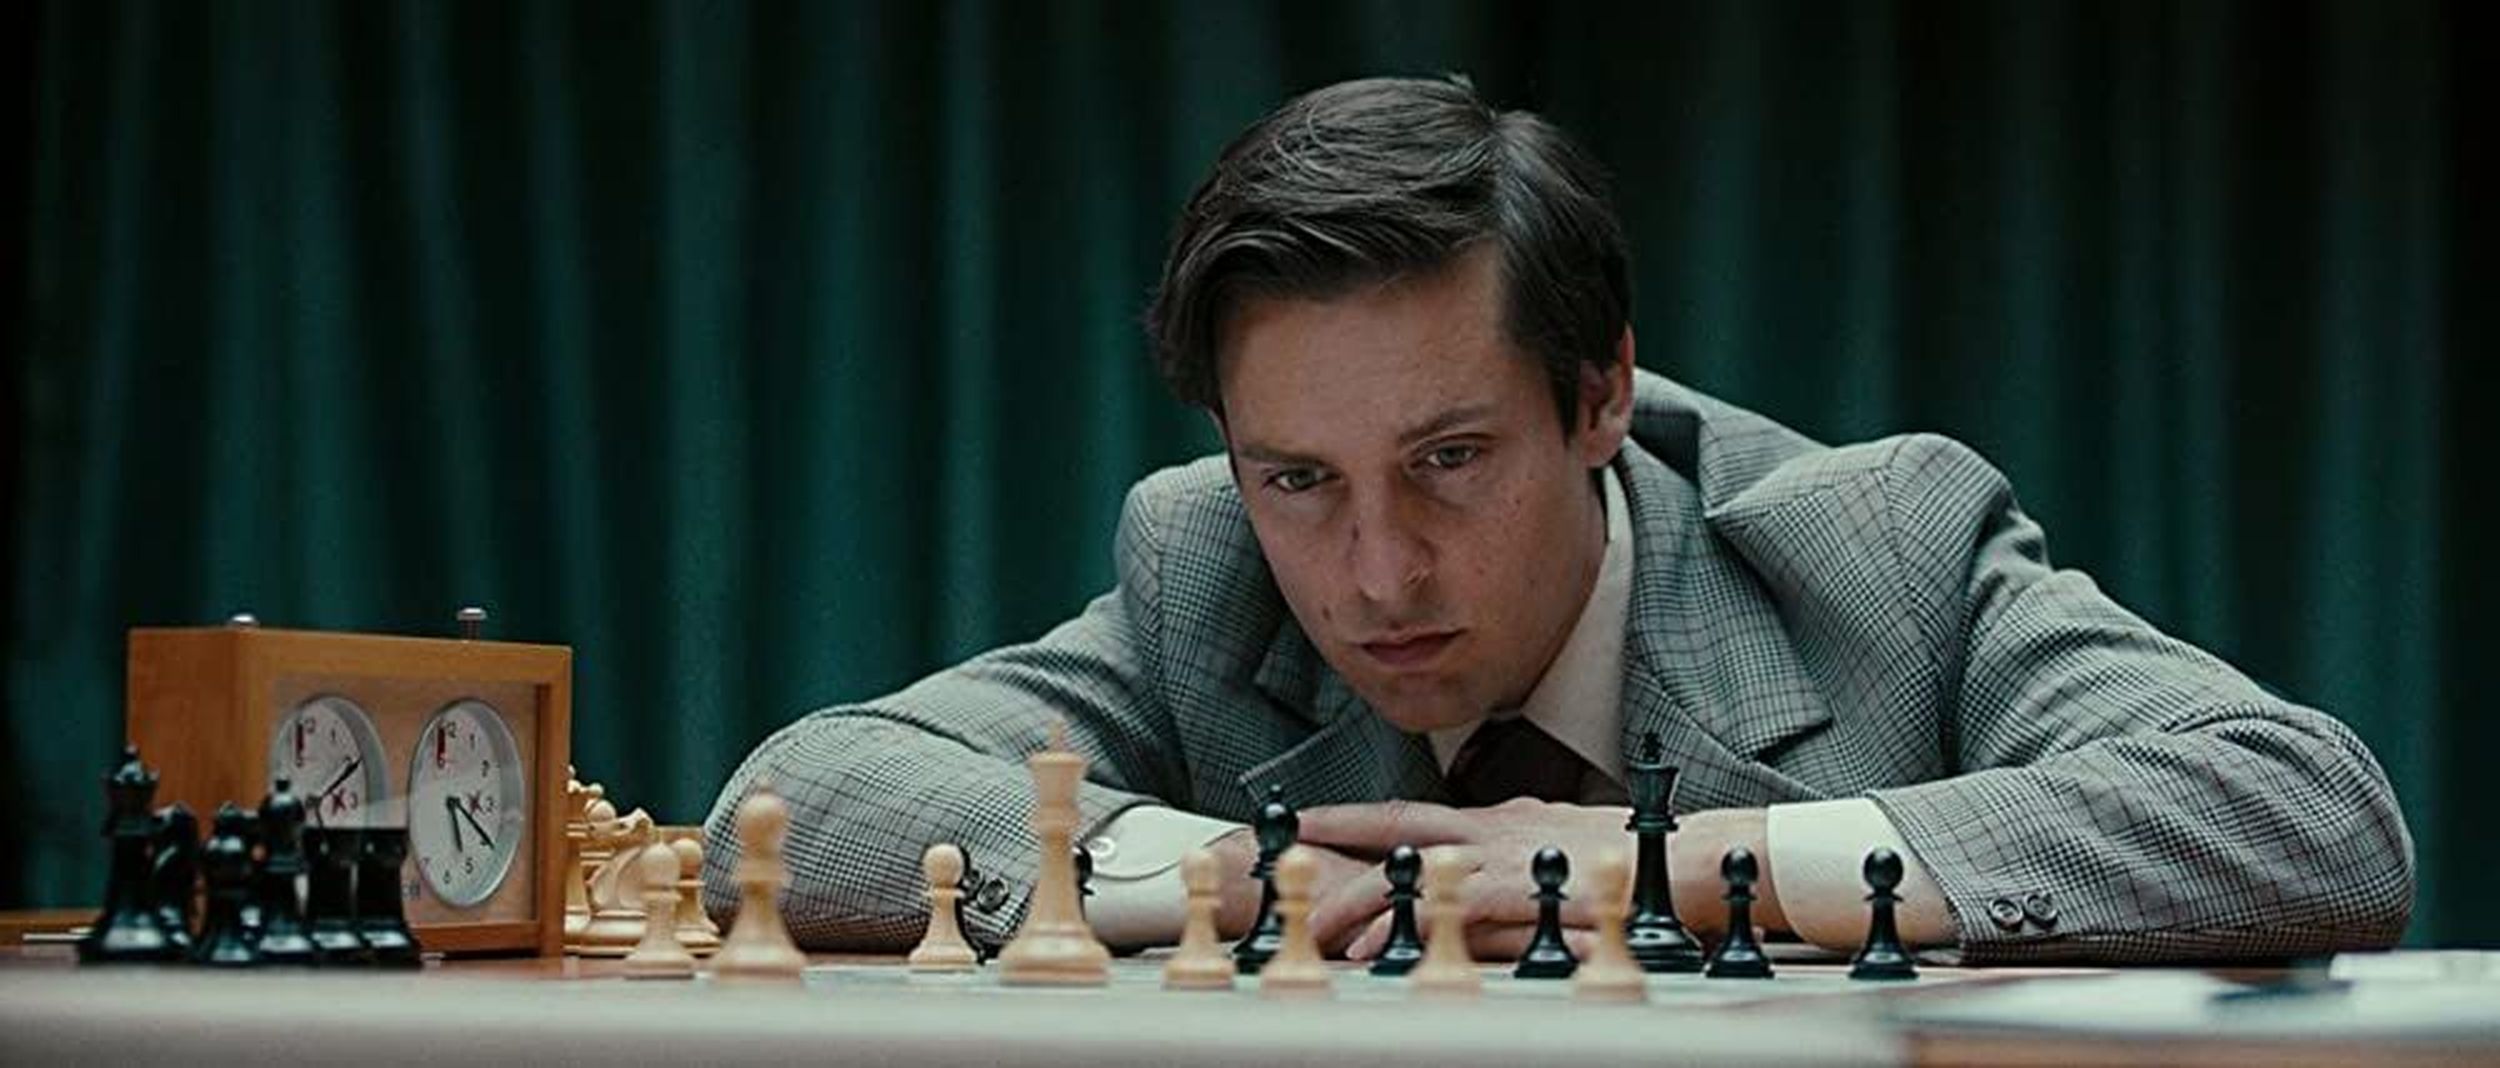 ▷ Chess movies on netflix: The best plataforma with chess movies